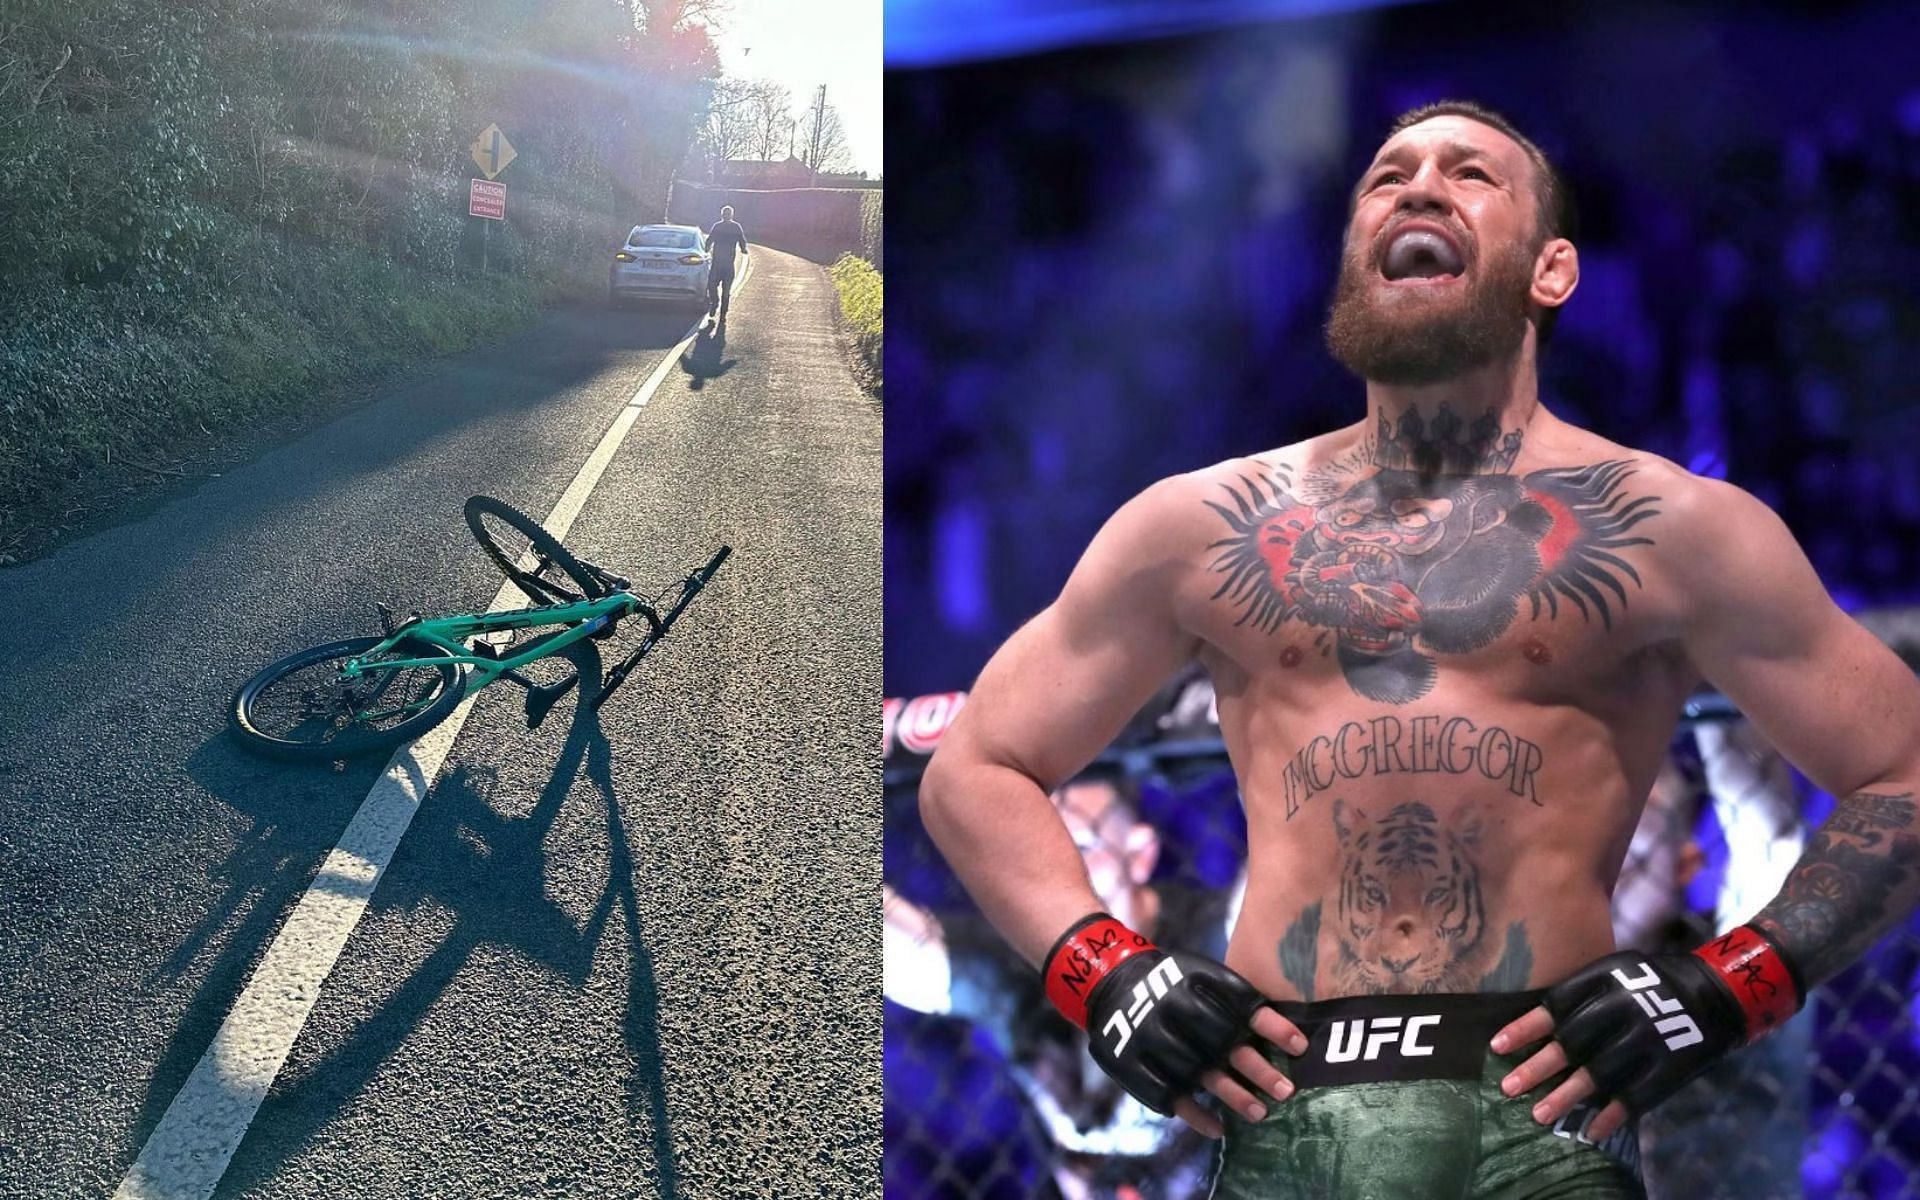 Conor McGregor was recently involved in a car accident [Image credits: @thenotoriousmma on Instagram]